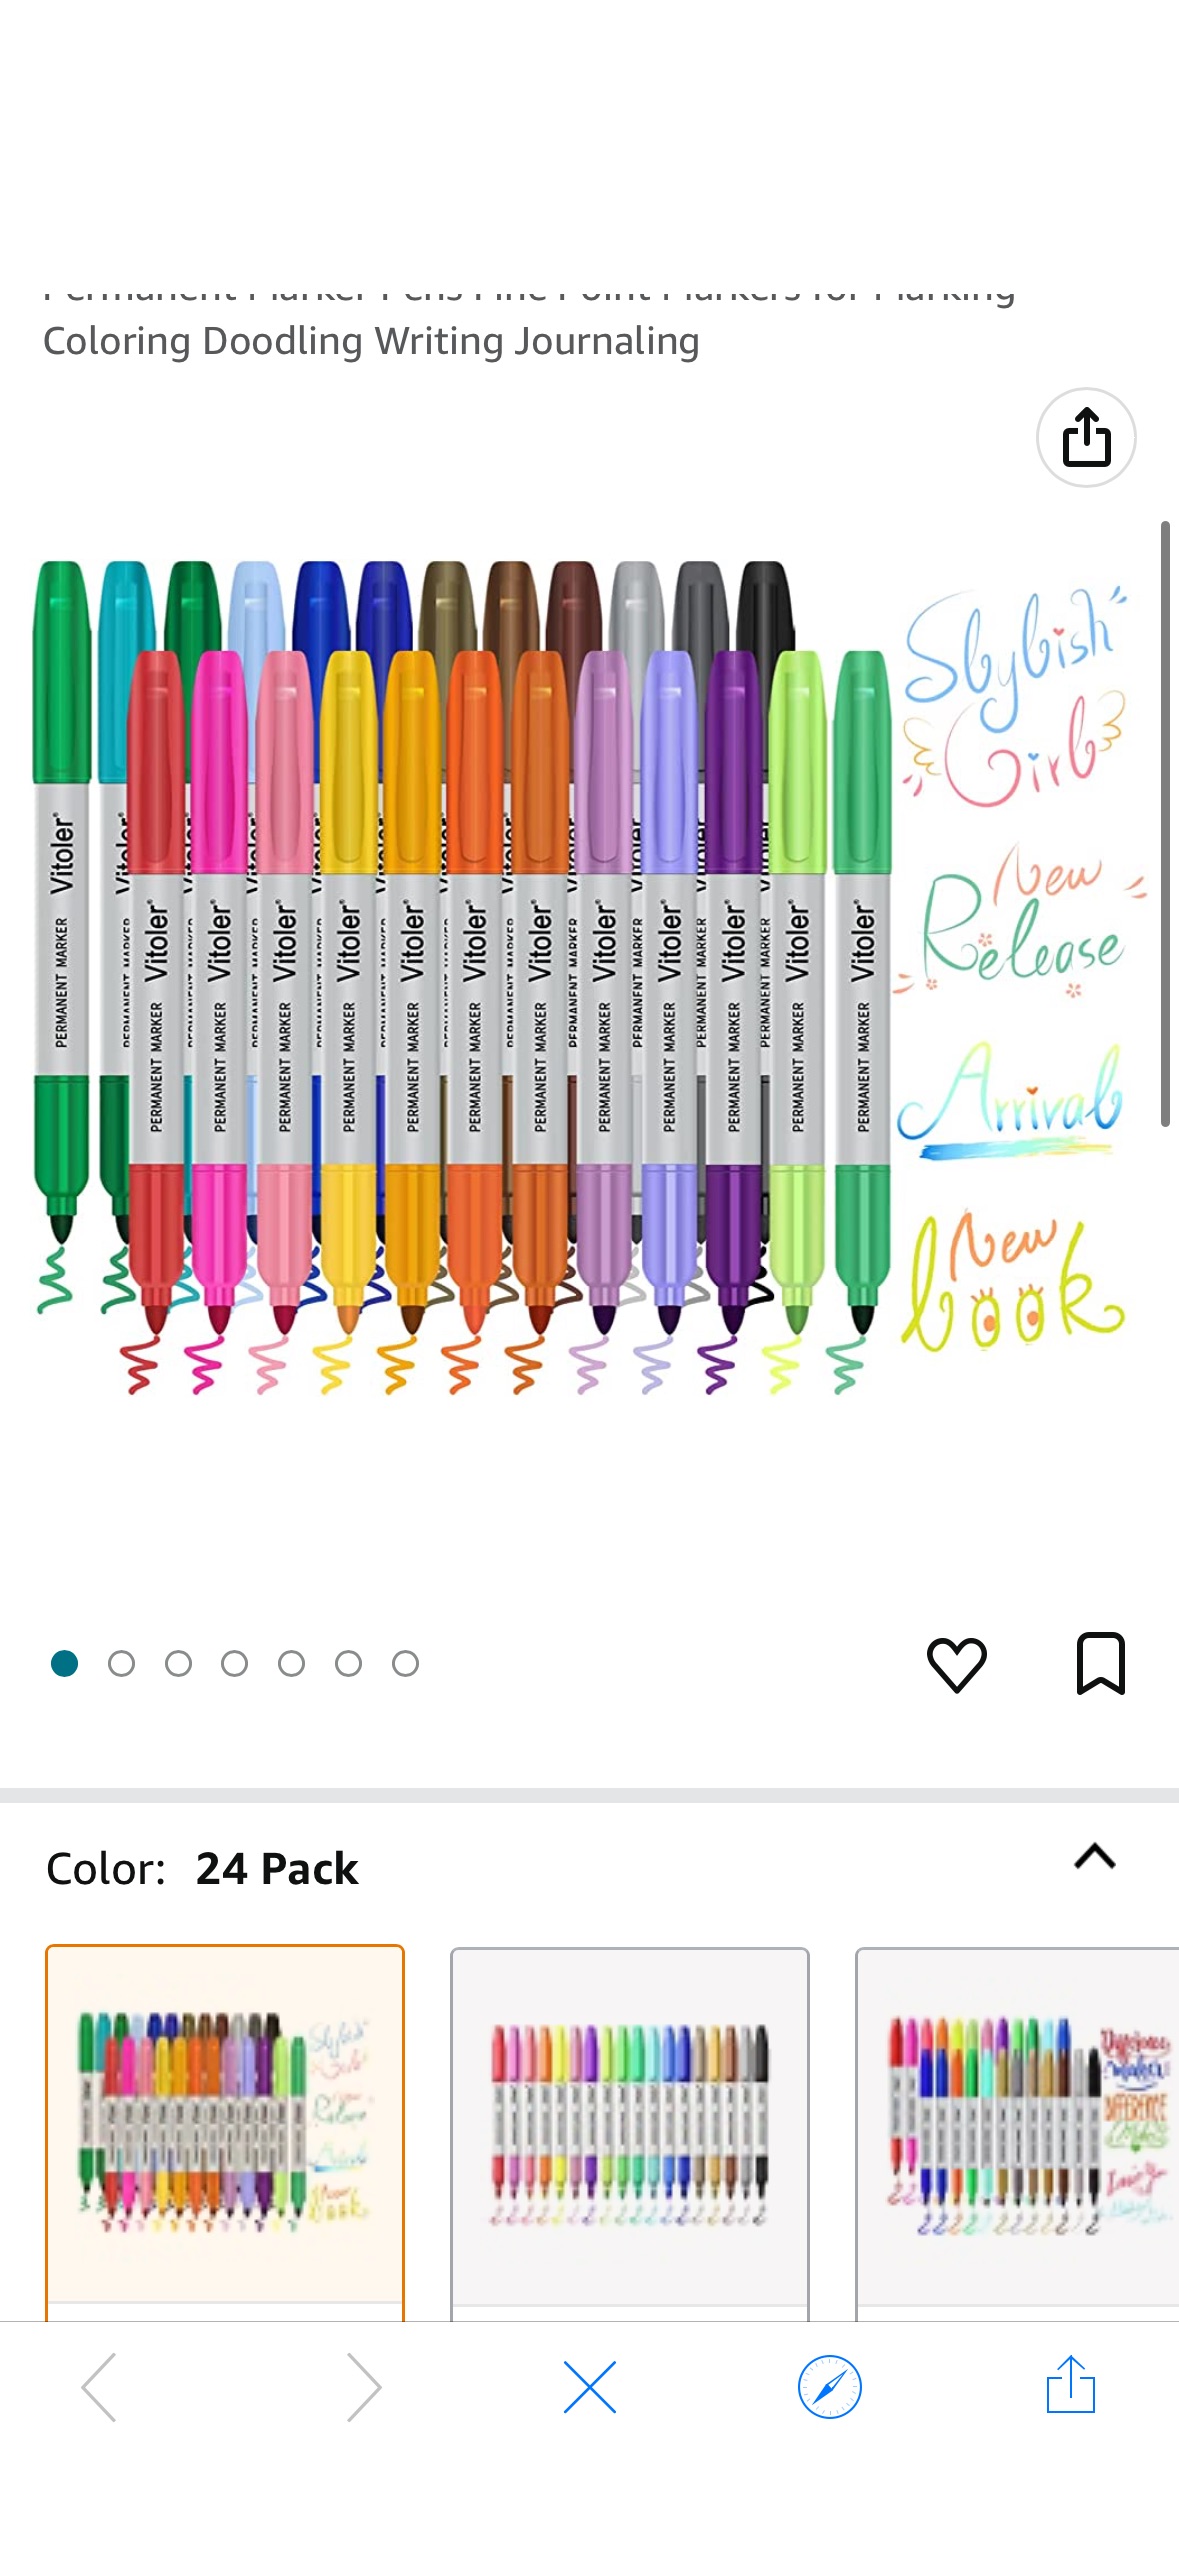 Amazon.com : Vitoler Colored Permanent Markers ,24 Assorted Colors Permanent Marker Pens Fine Point Markers for Marking Coloring Doodling Writing Journaling